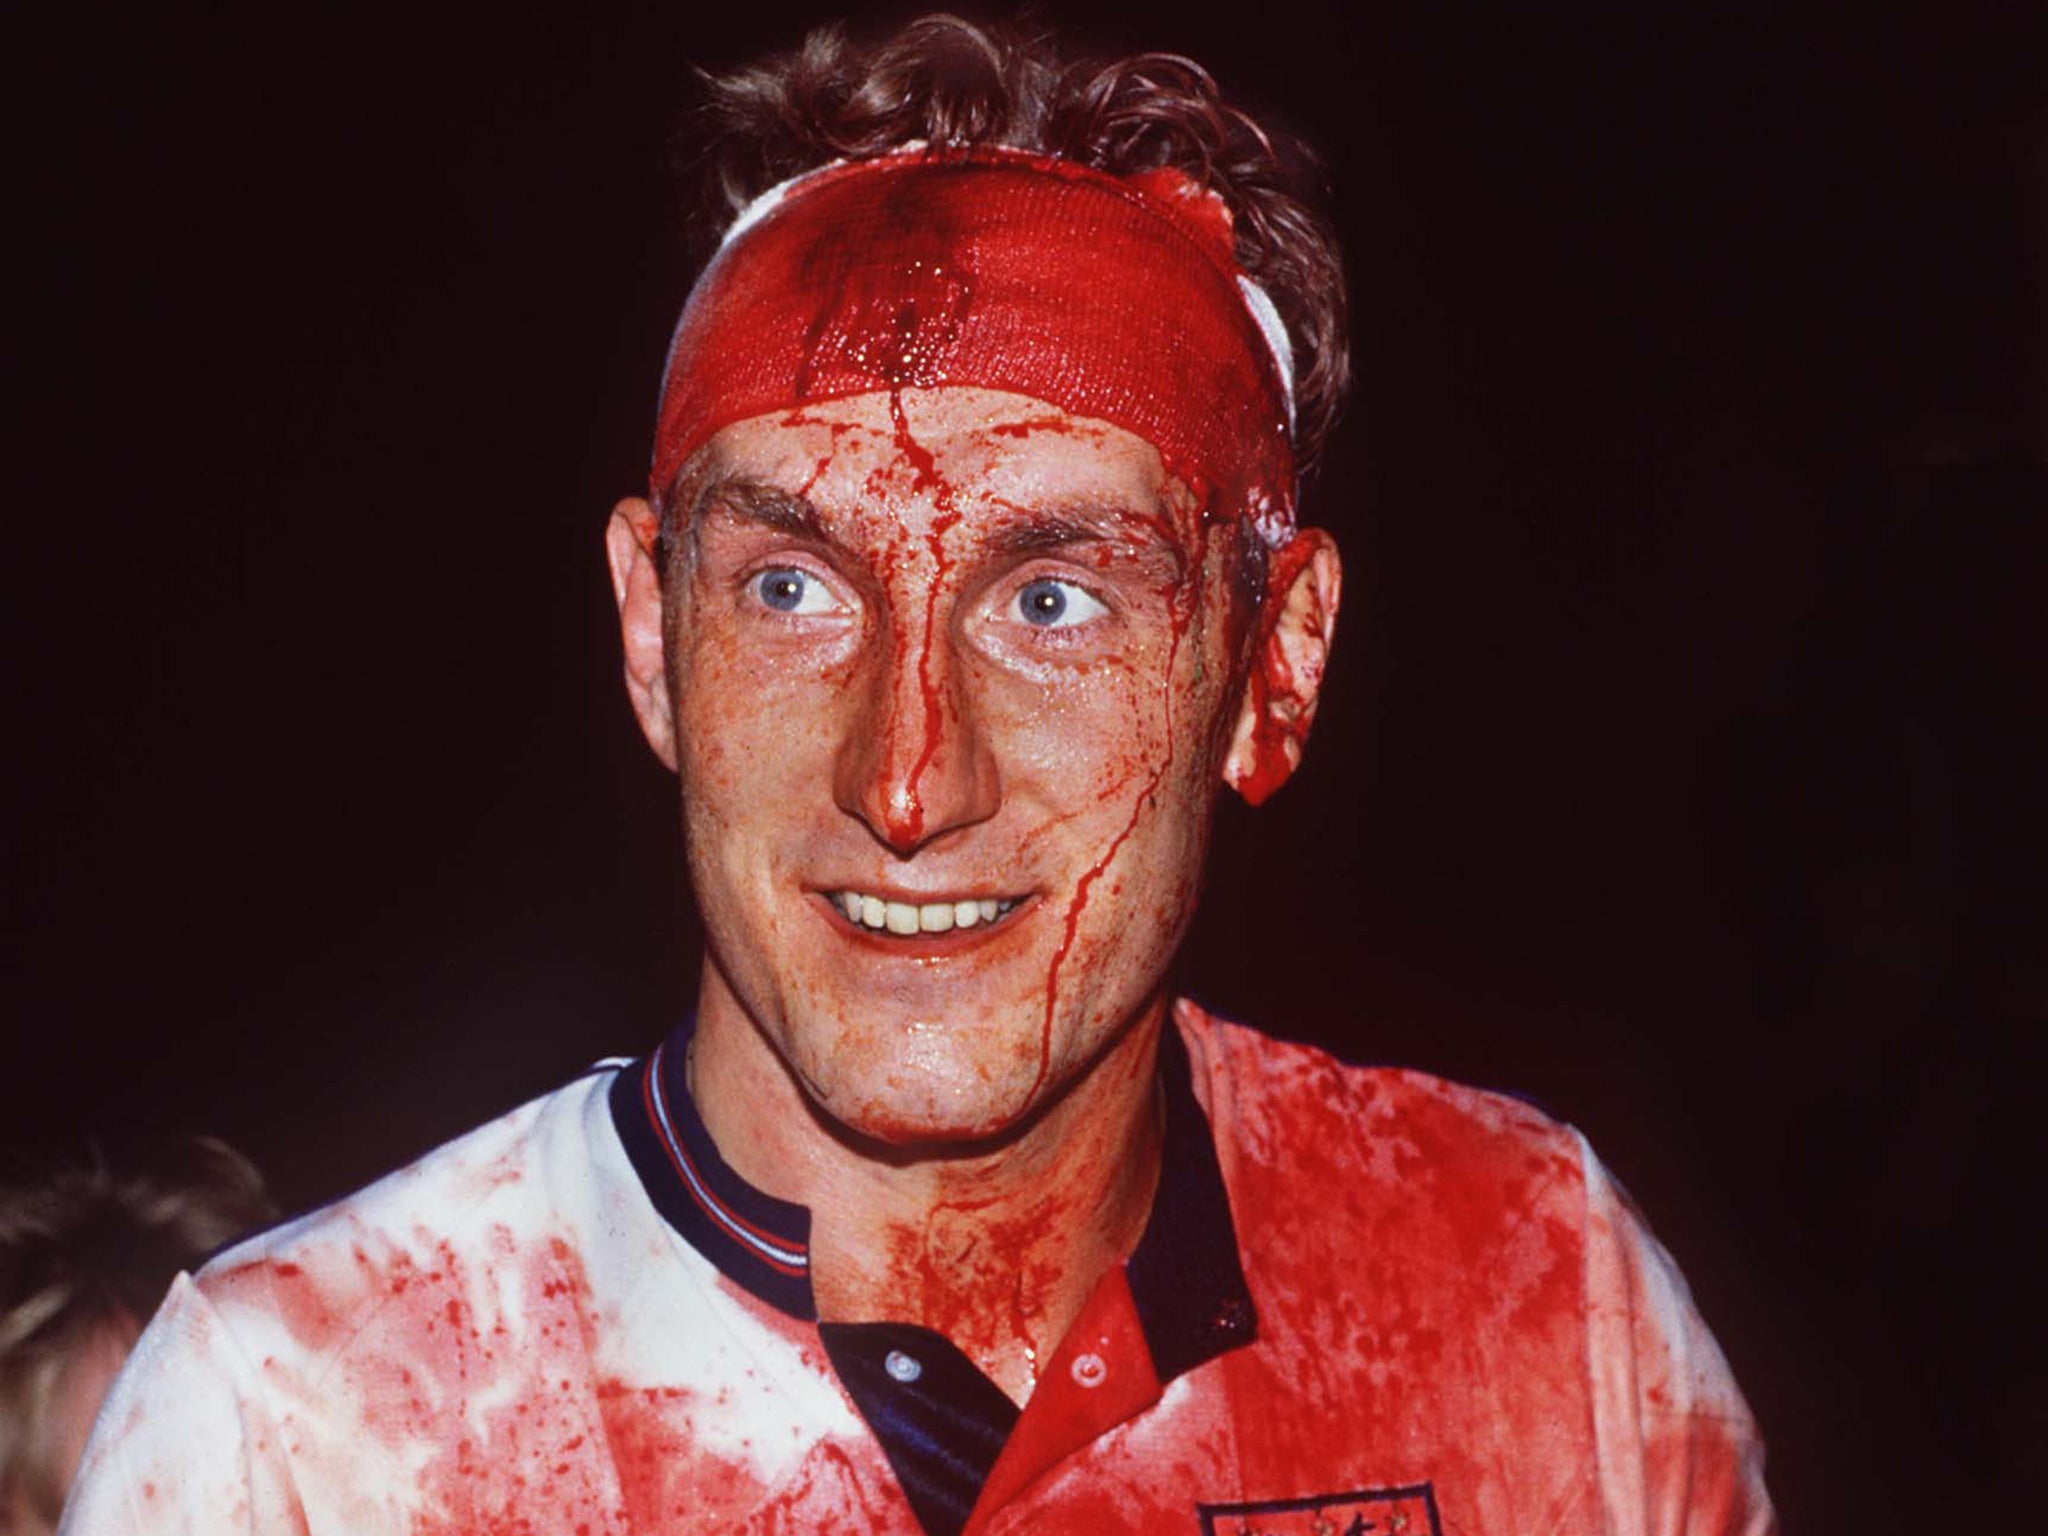 Terry Butcher was left covered in blood during England's match against Sweden in 1989